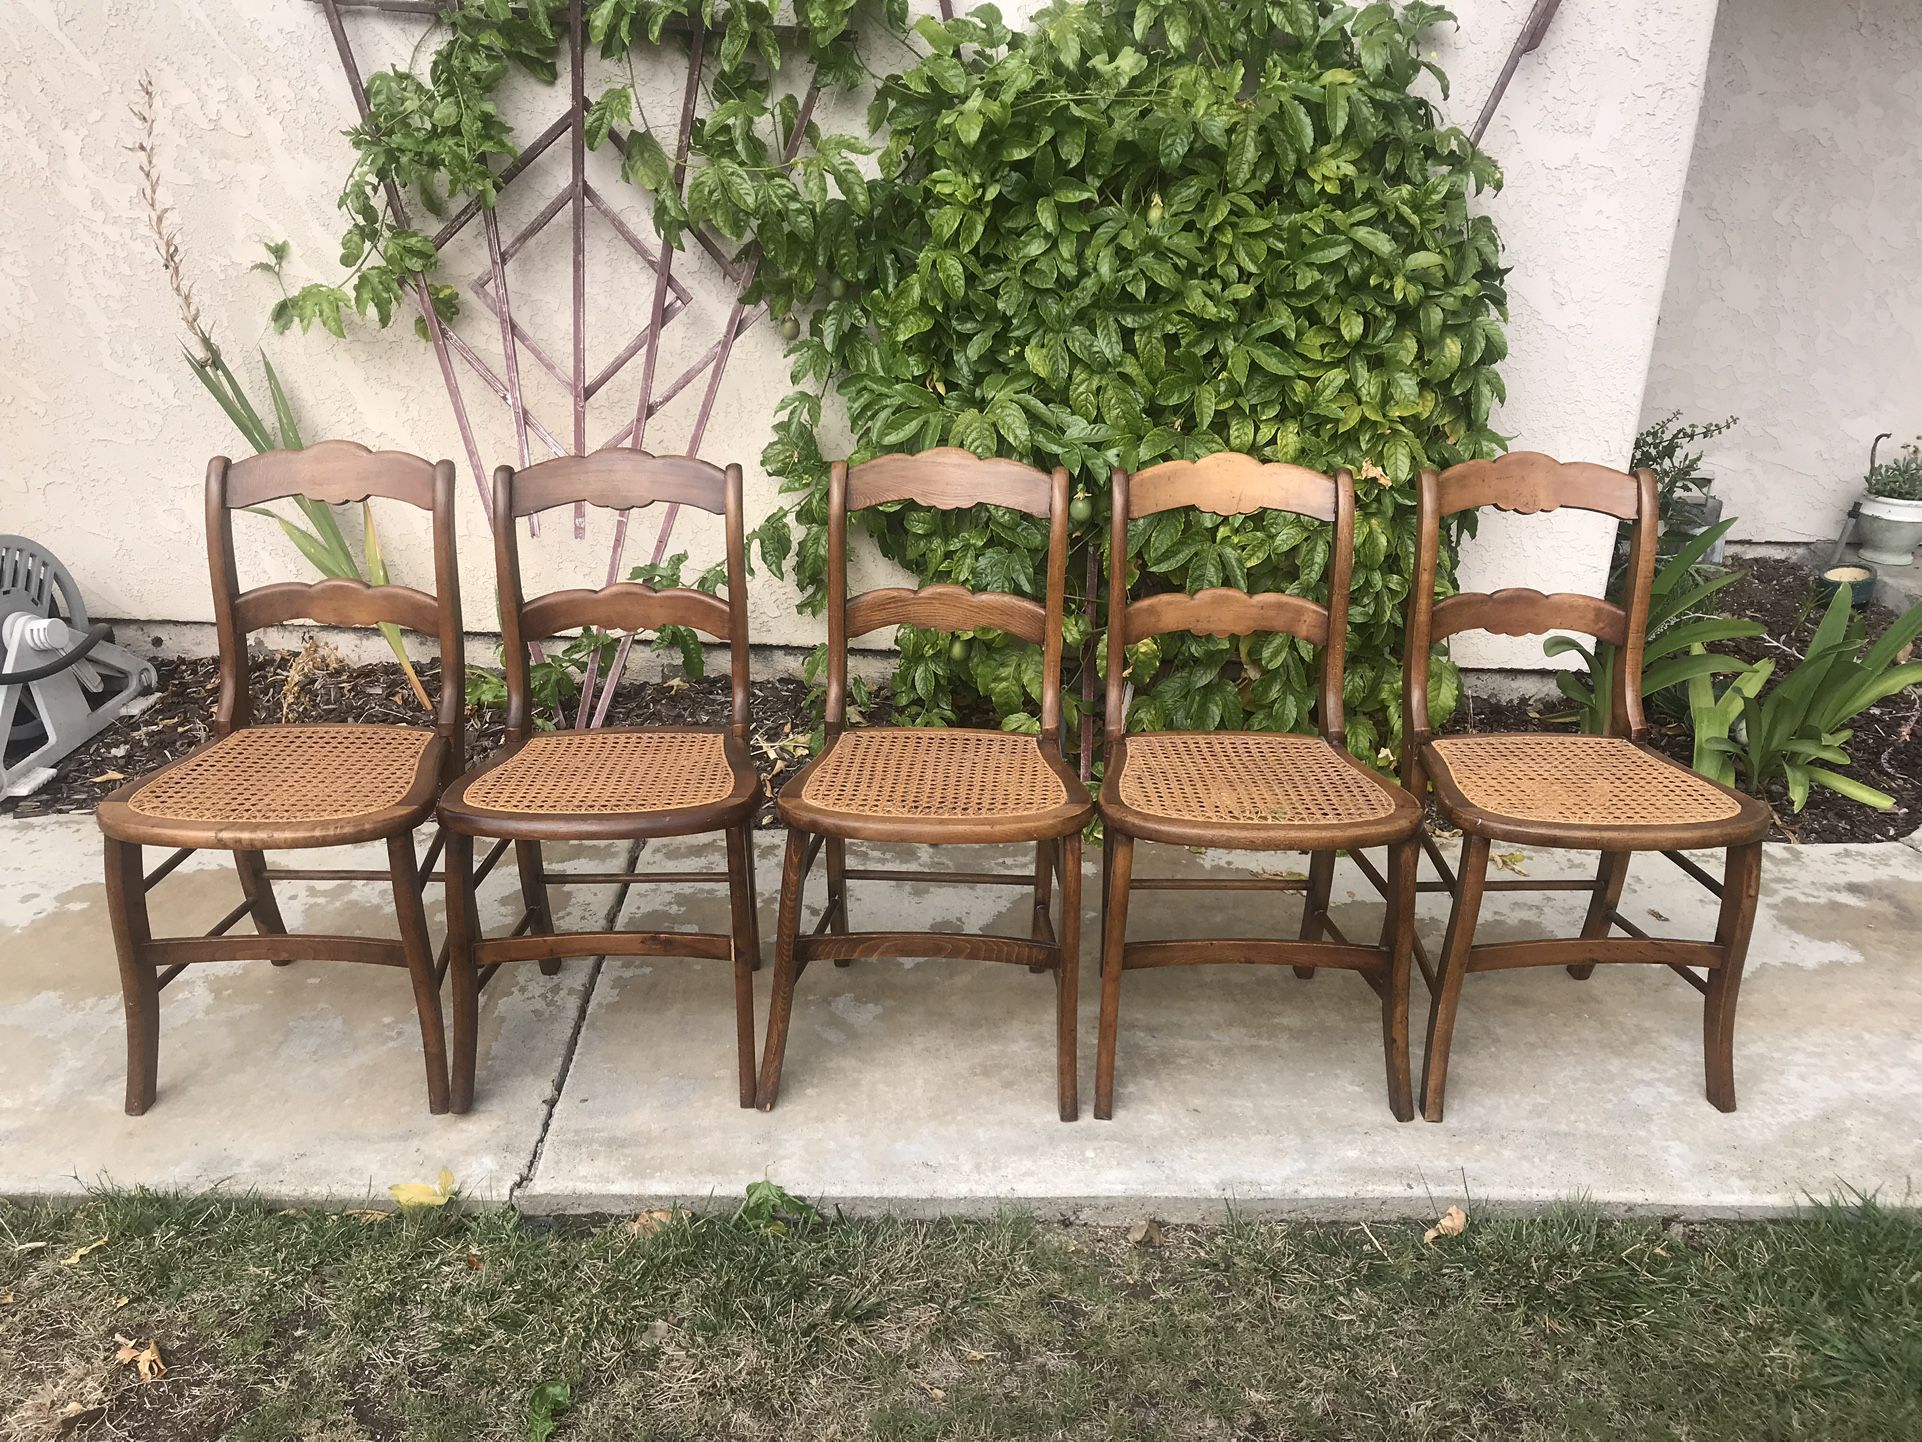 Antique Wooden Woven Chairs